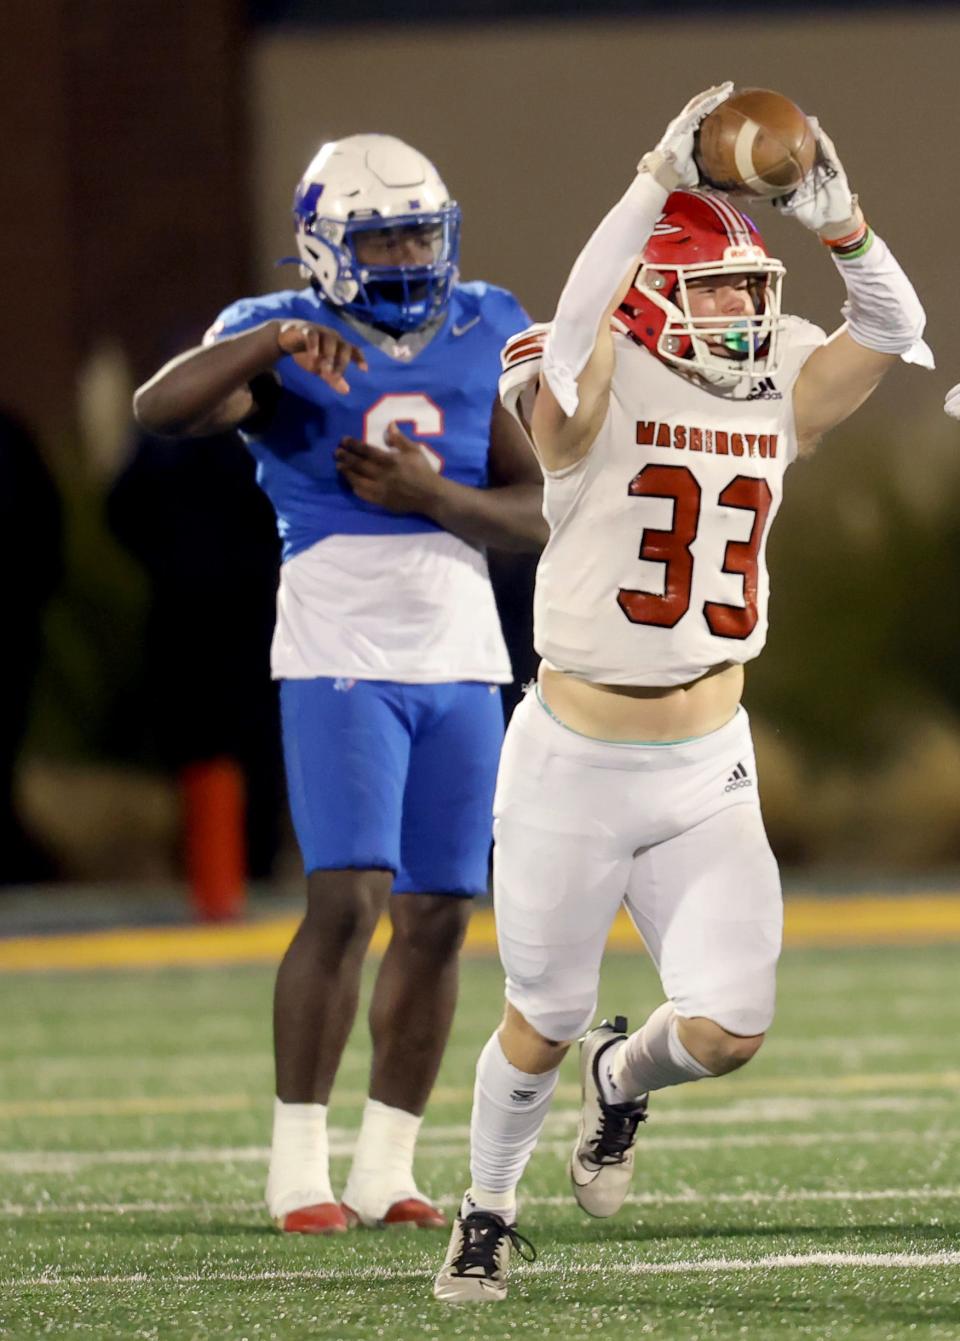 Washington's Cooper Alexander celebrates a fumble recovery in the second half of the Class 2A high school football championship game between Millwood and Washington at Chad Richison Stadium in Edmond, Okla., Saturday, Dec. 9, 2023.